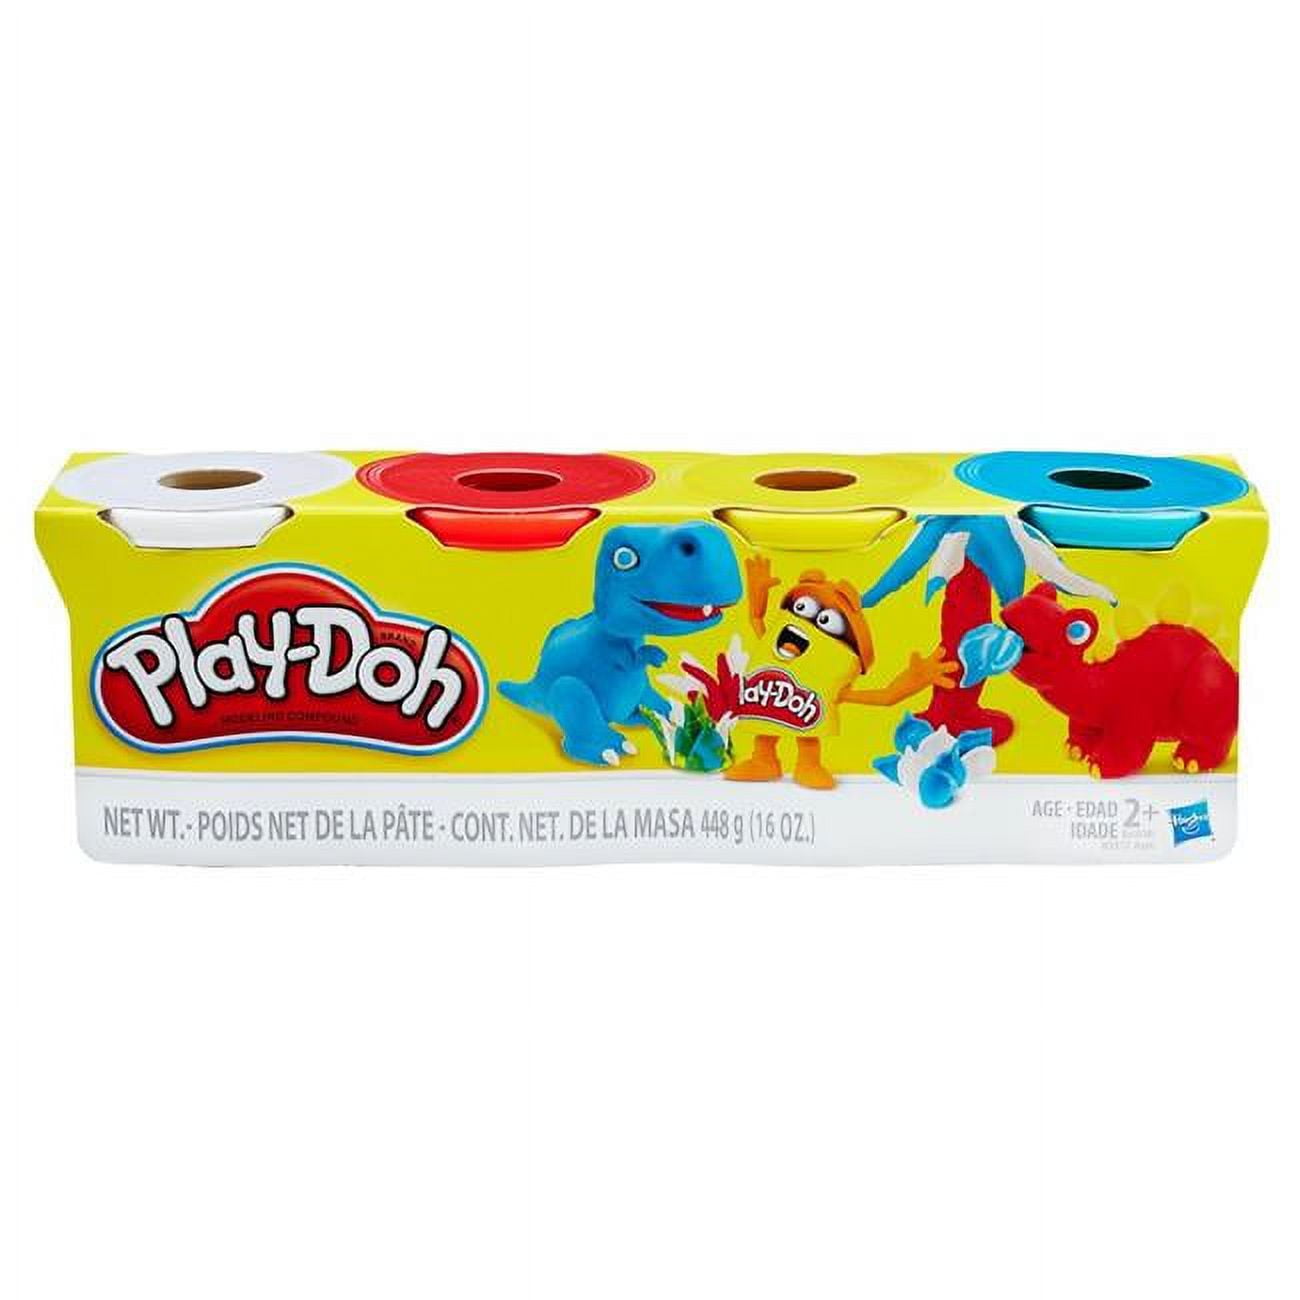 Hsbb6508 4 Oz Play-doh Primary Color Assortment